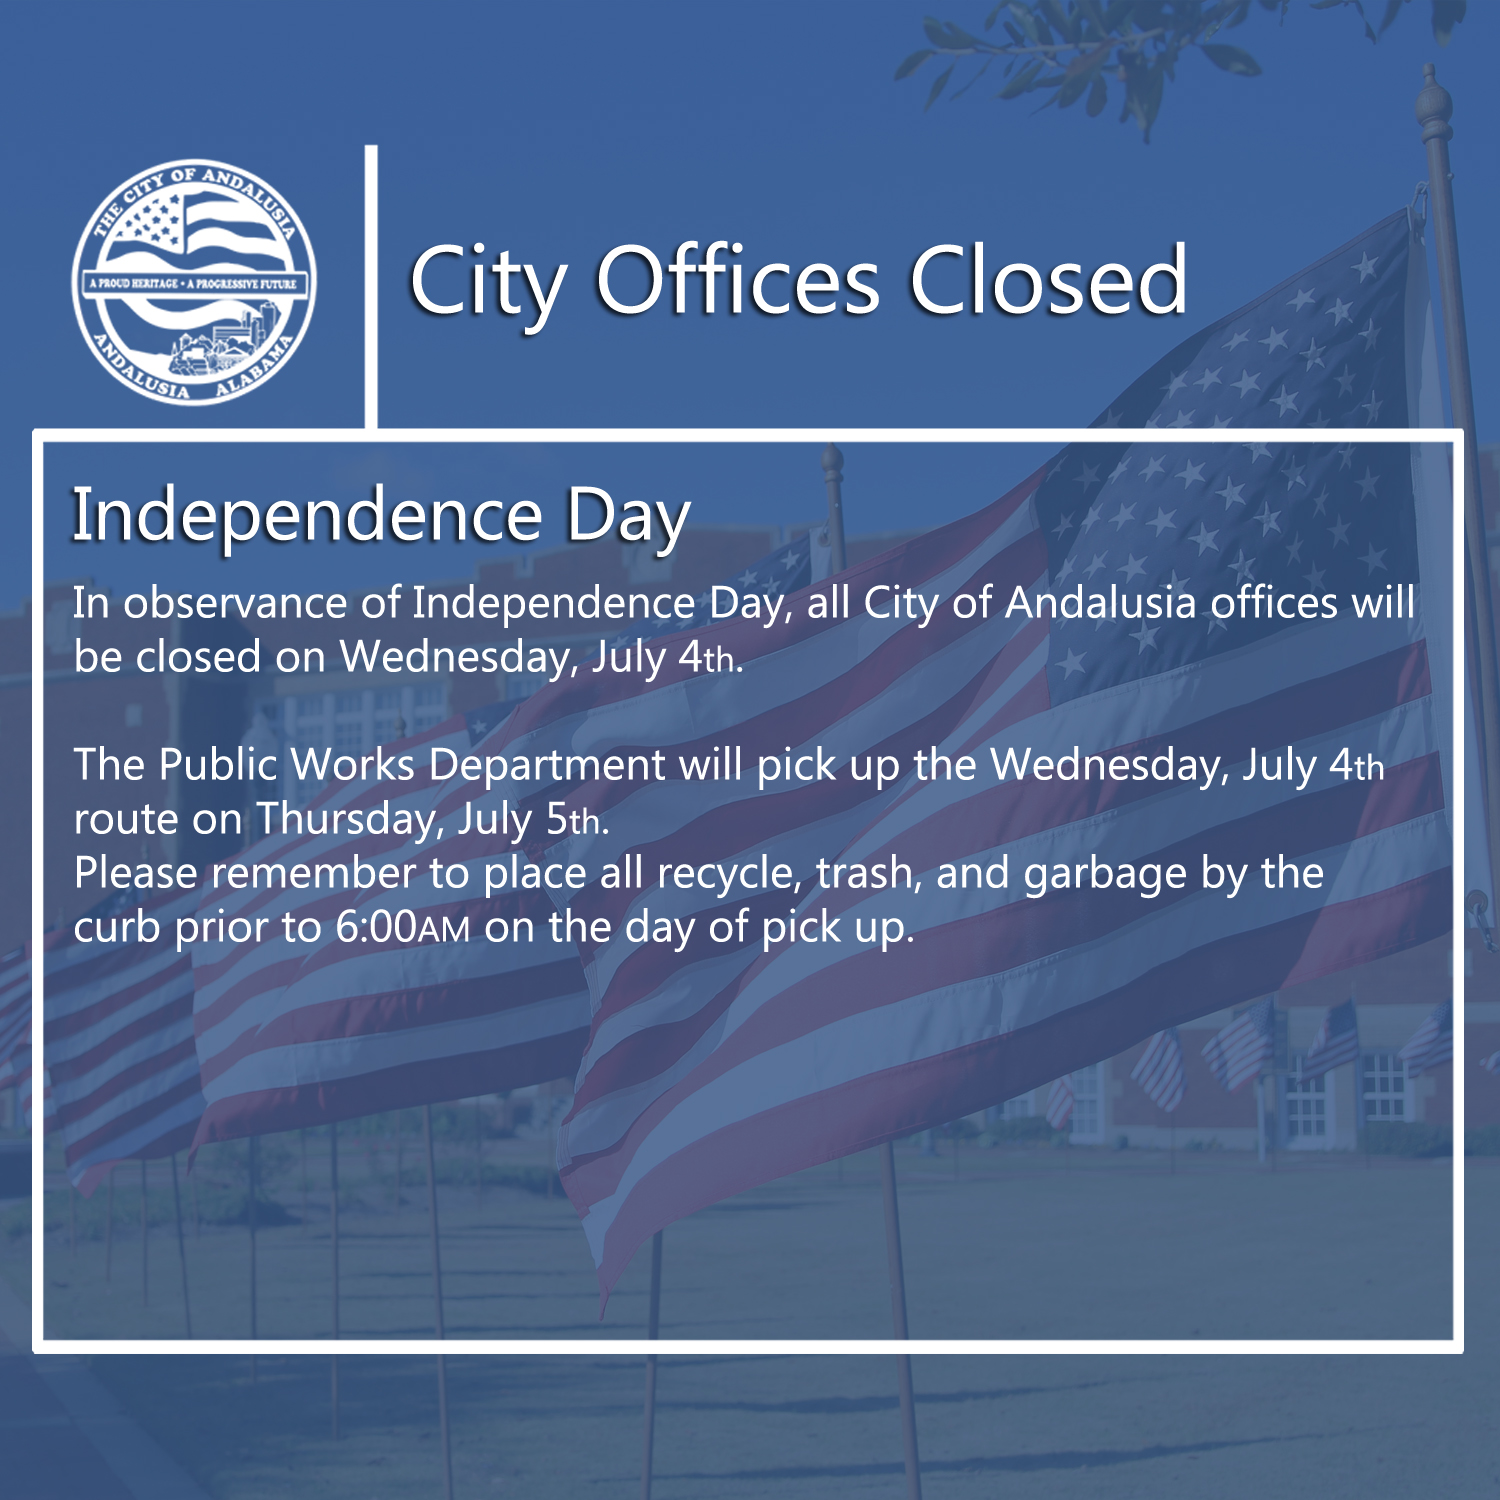 Facebook - City Offices Closed-Independence Day.jpg